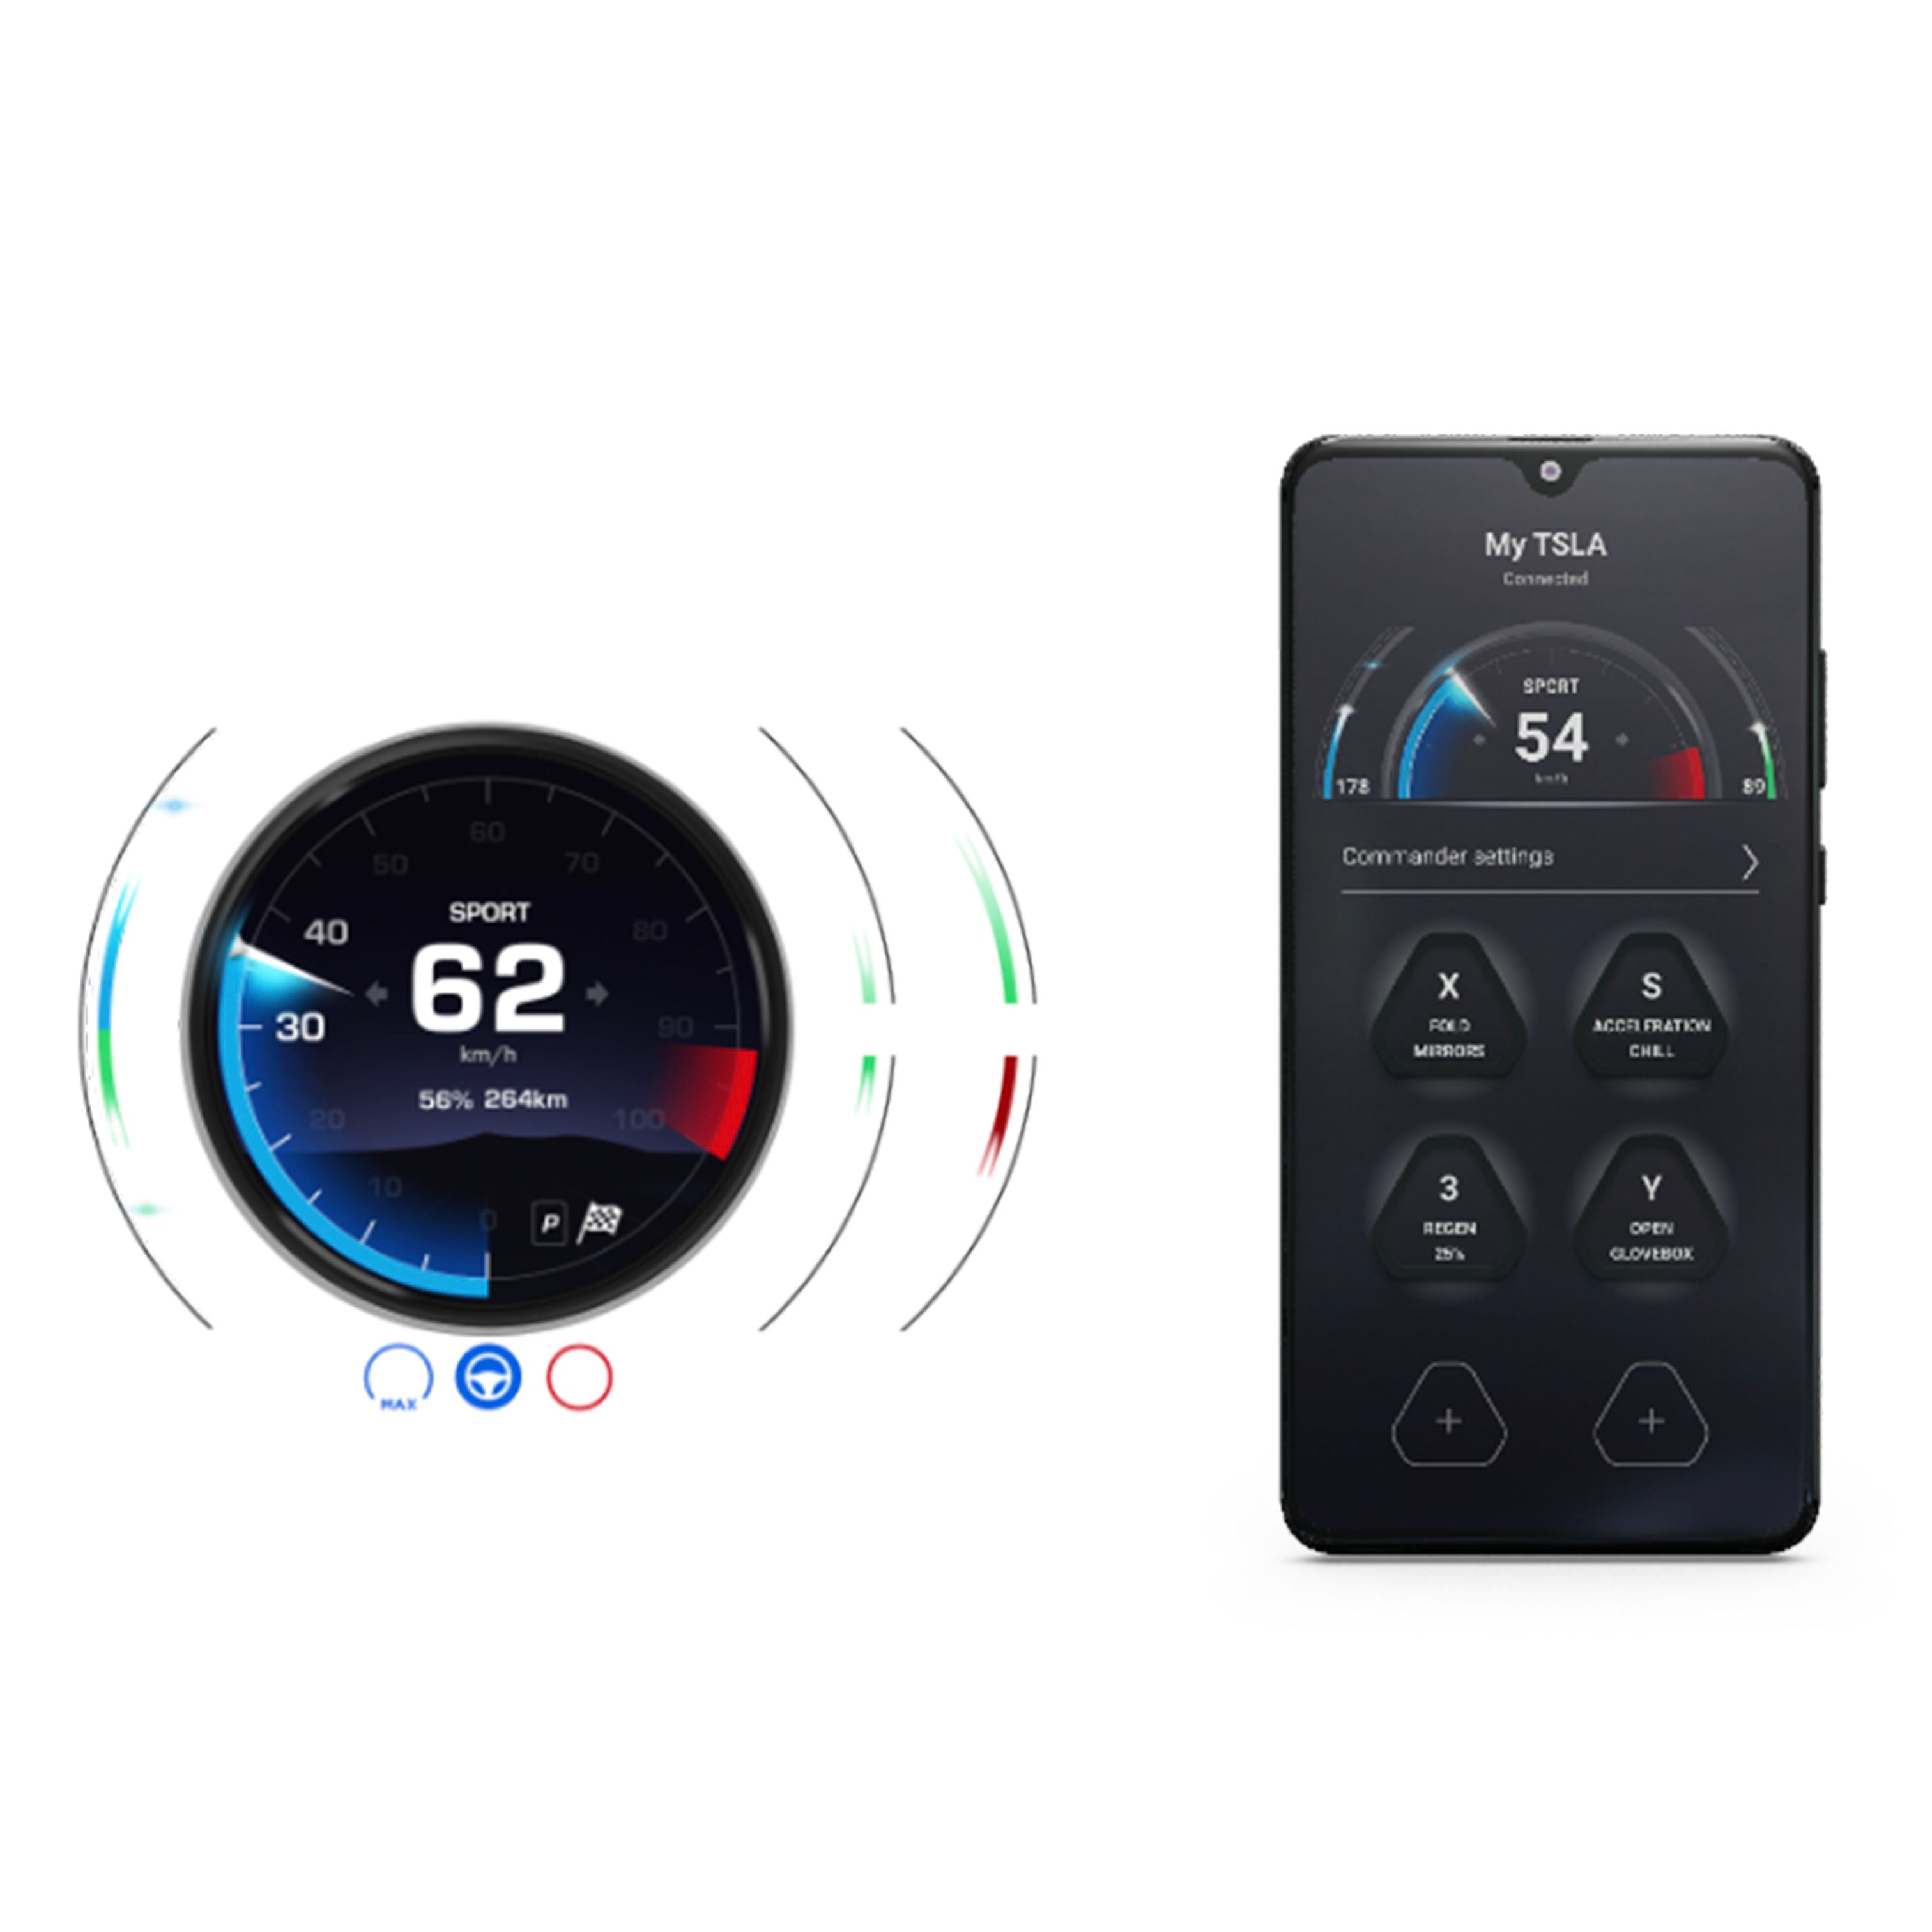 S3XY quick access and smart buttons for Tesla